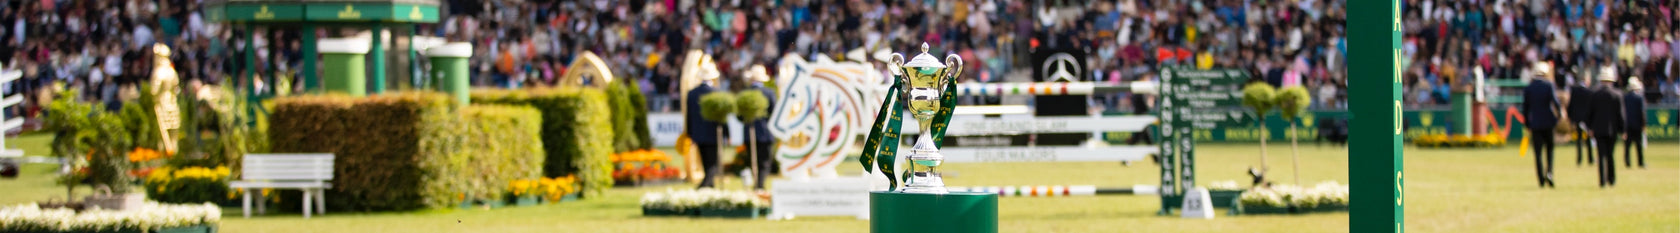 An equestrian trophy shown at competition at Spruce Meadows.